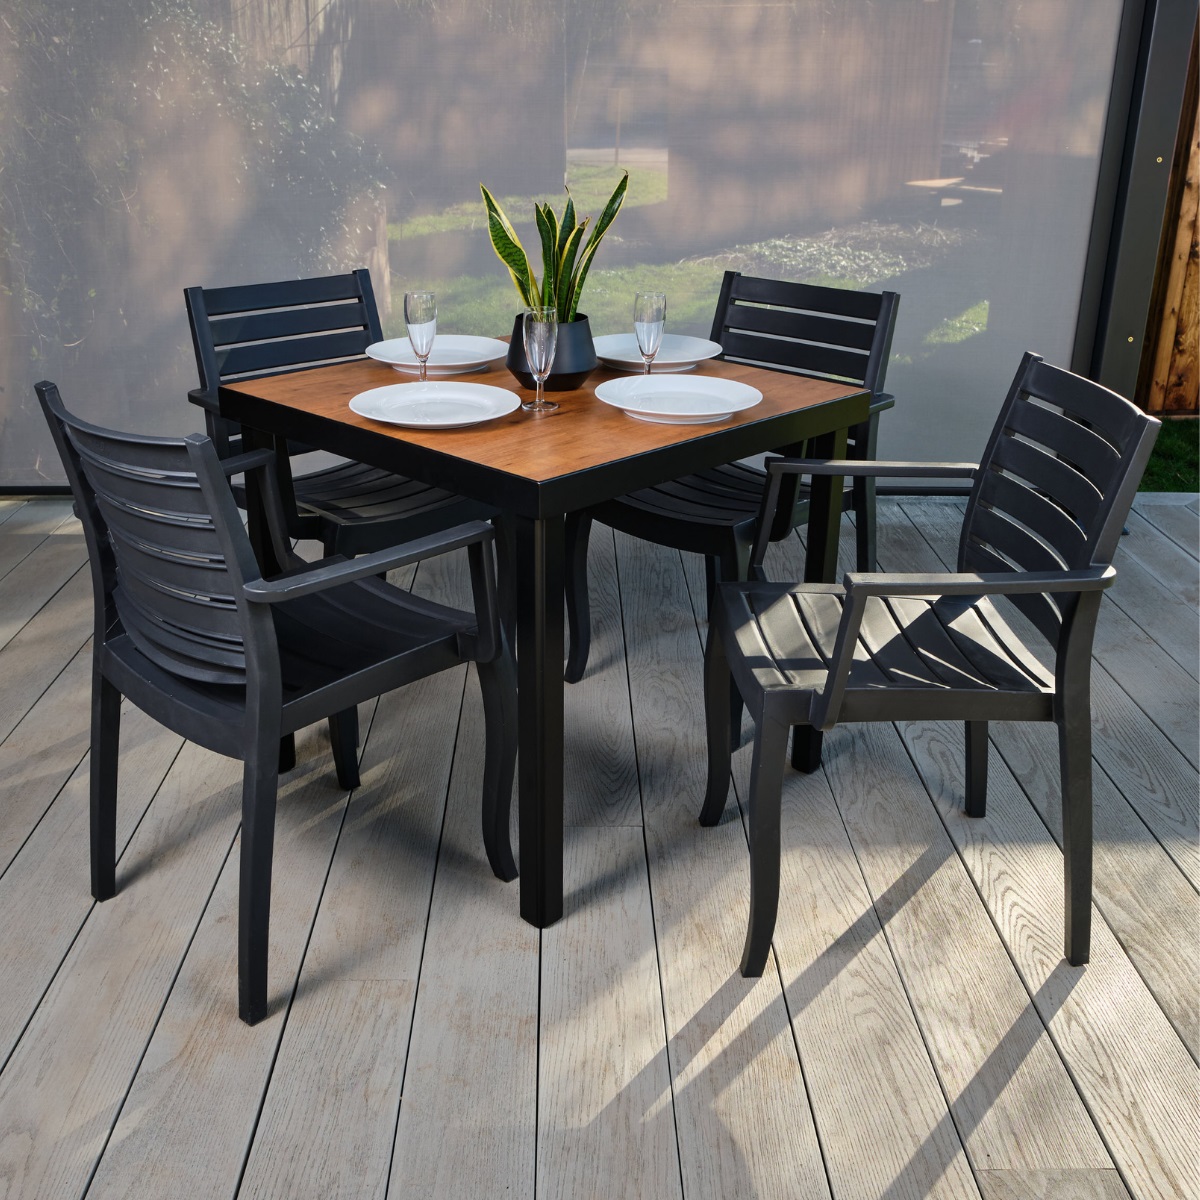 Square Outdoor Dining Table Budget Range Ideal For Pubs Holiday Parks